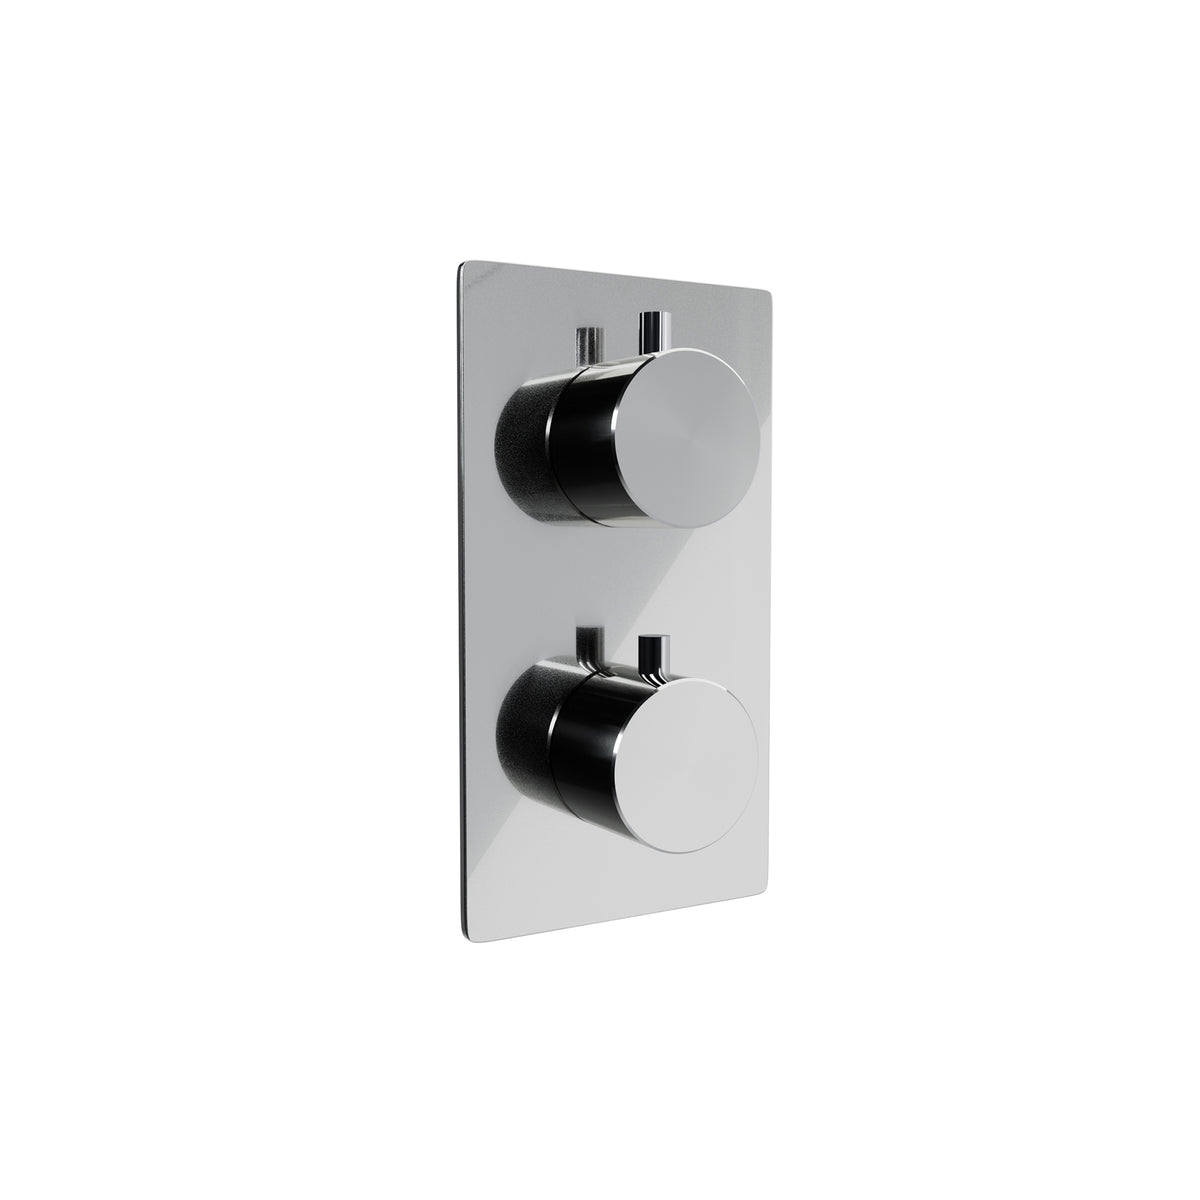 Sorentto Wall Mounted Termostatic Shower Mixer in Chrome